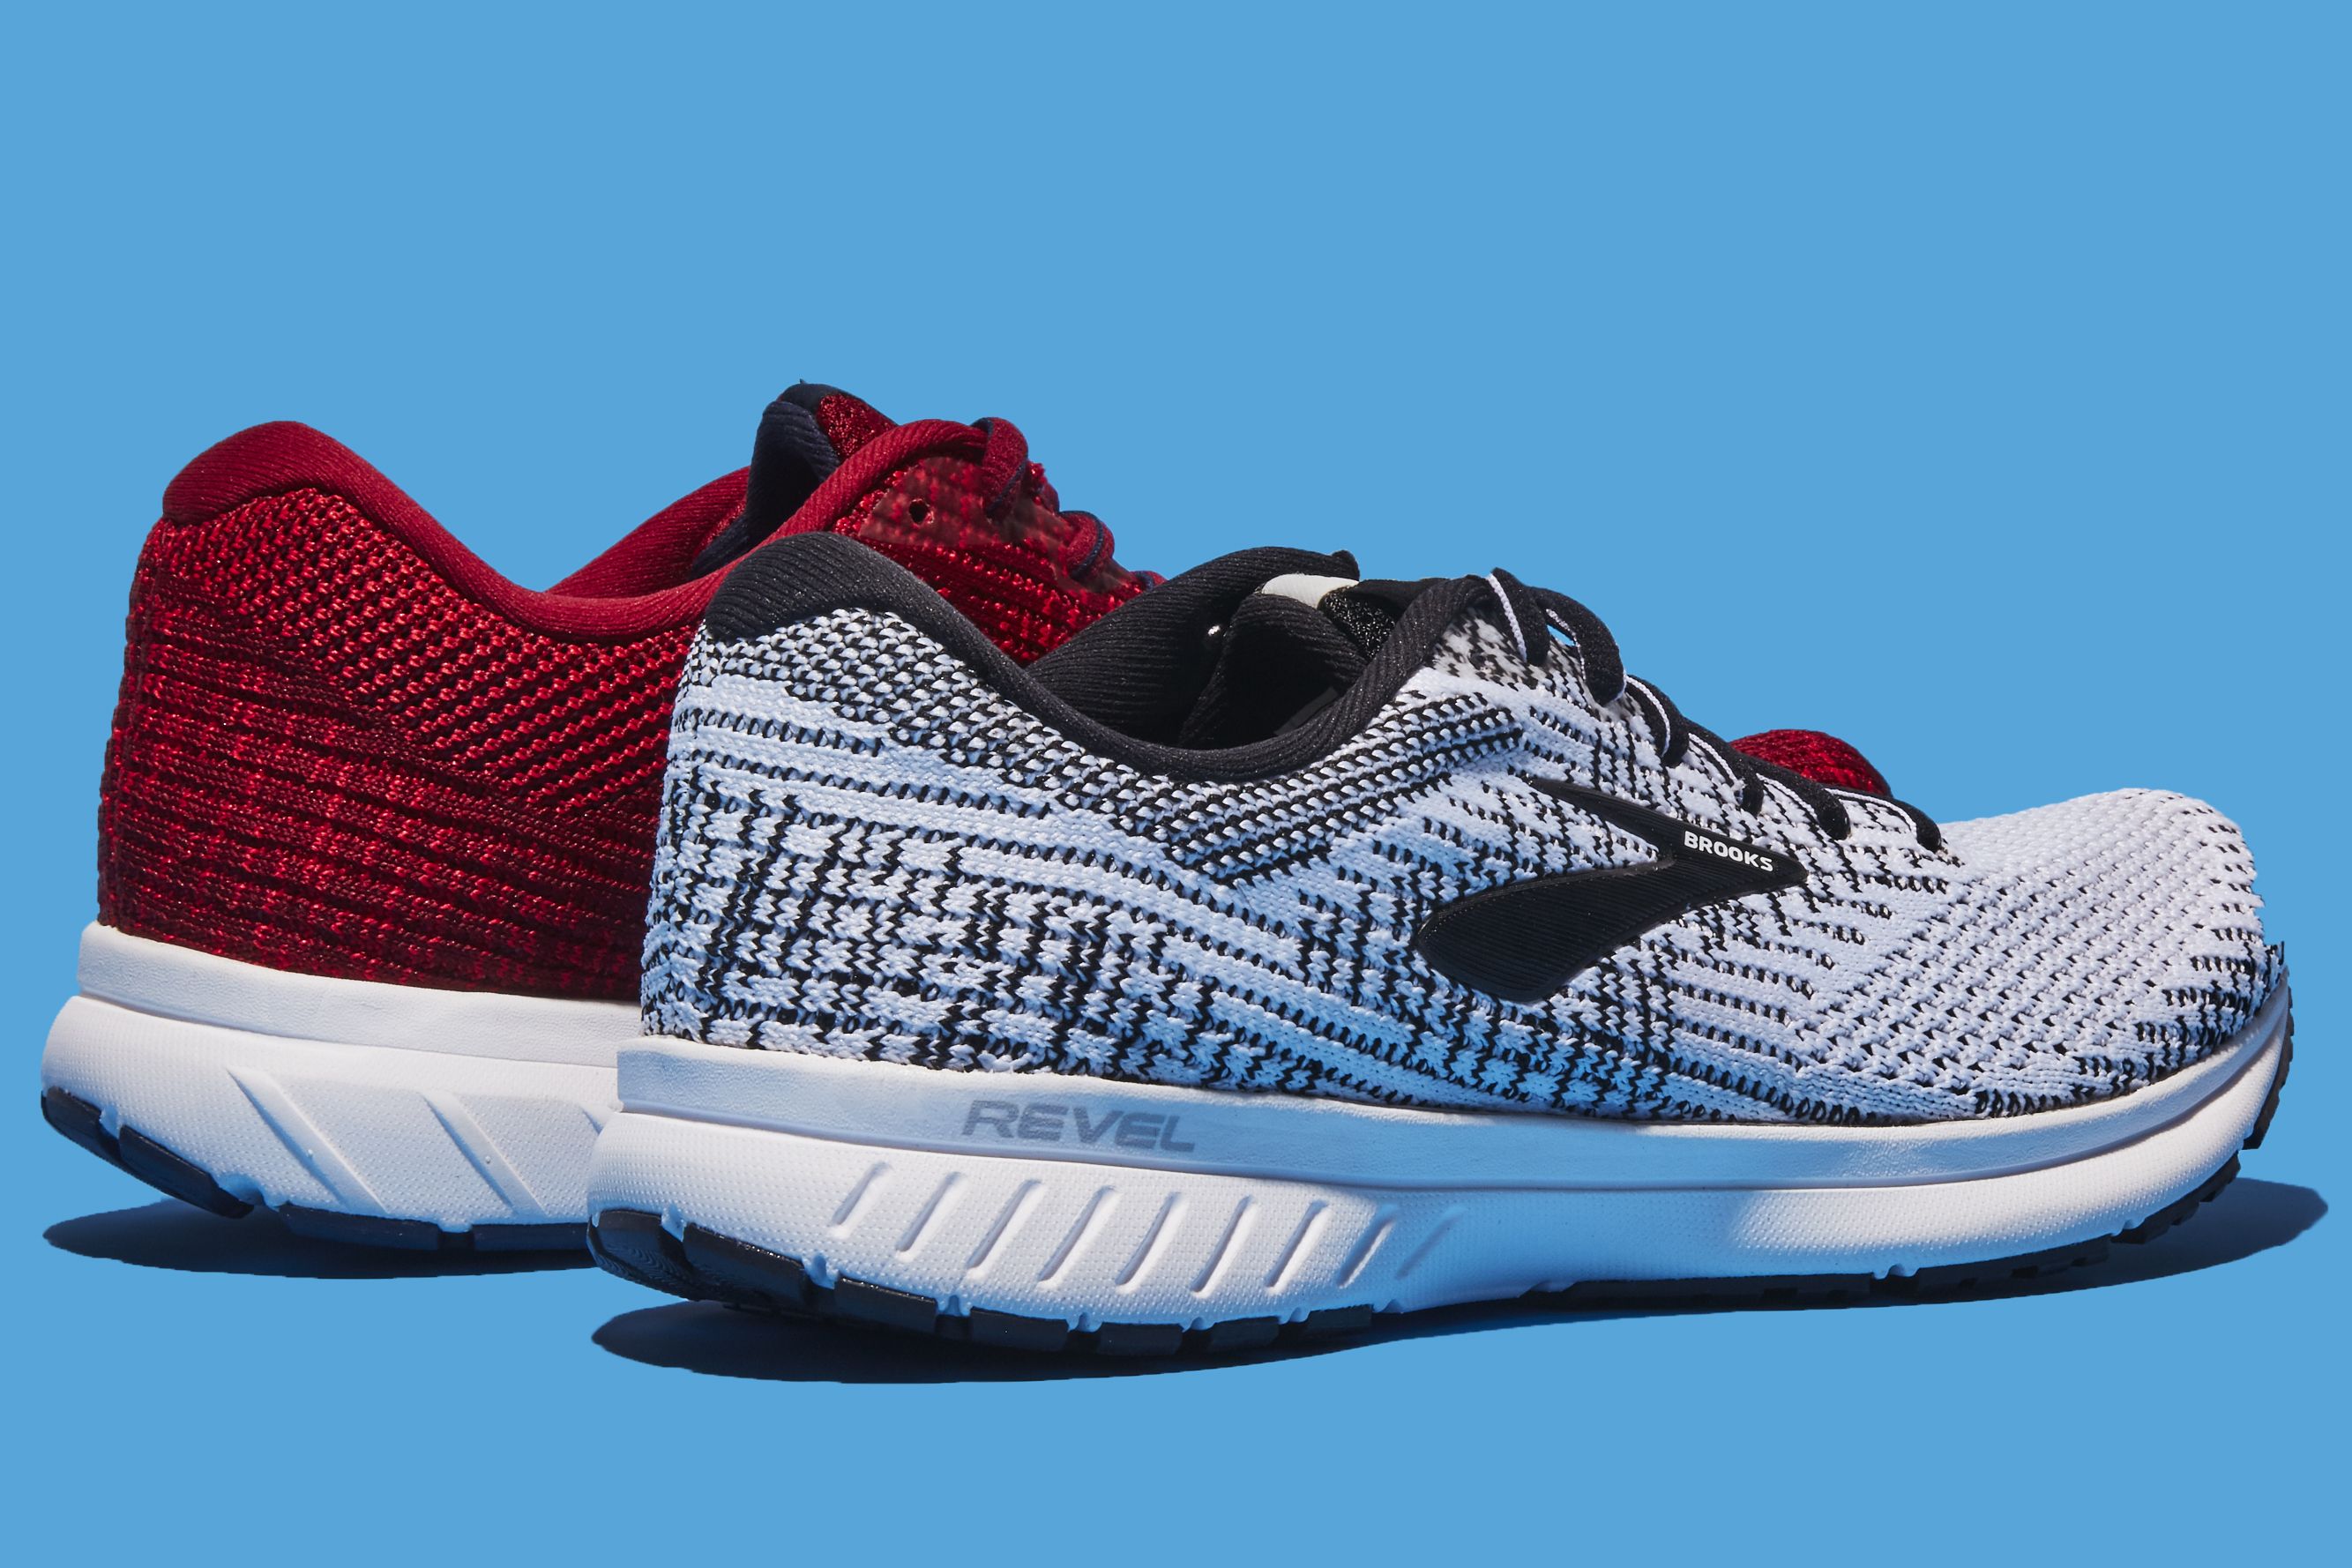 Brooks Revel 3 Review | Best Affordable Running Shoes 2019